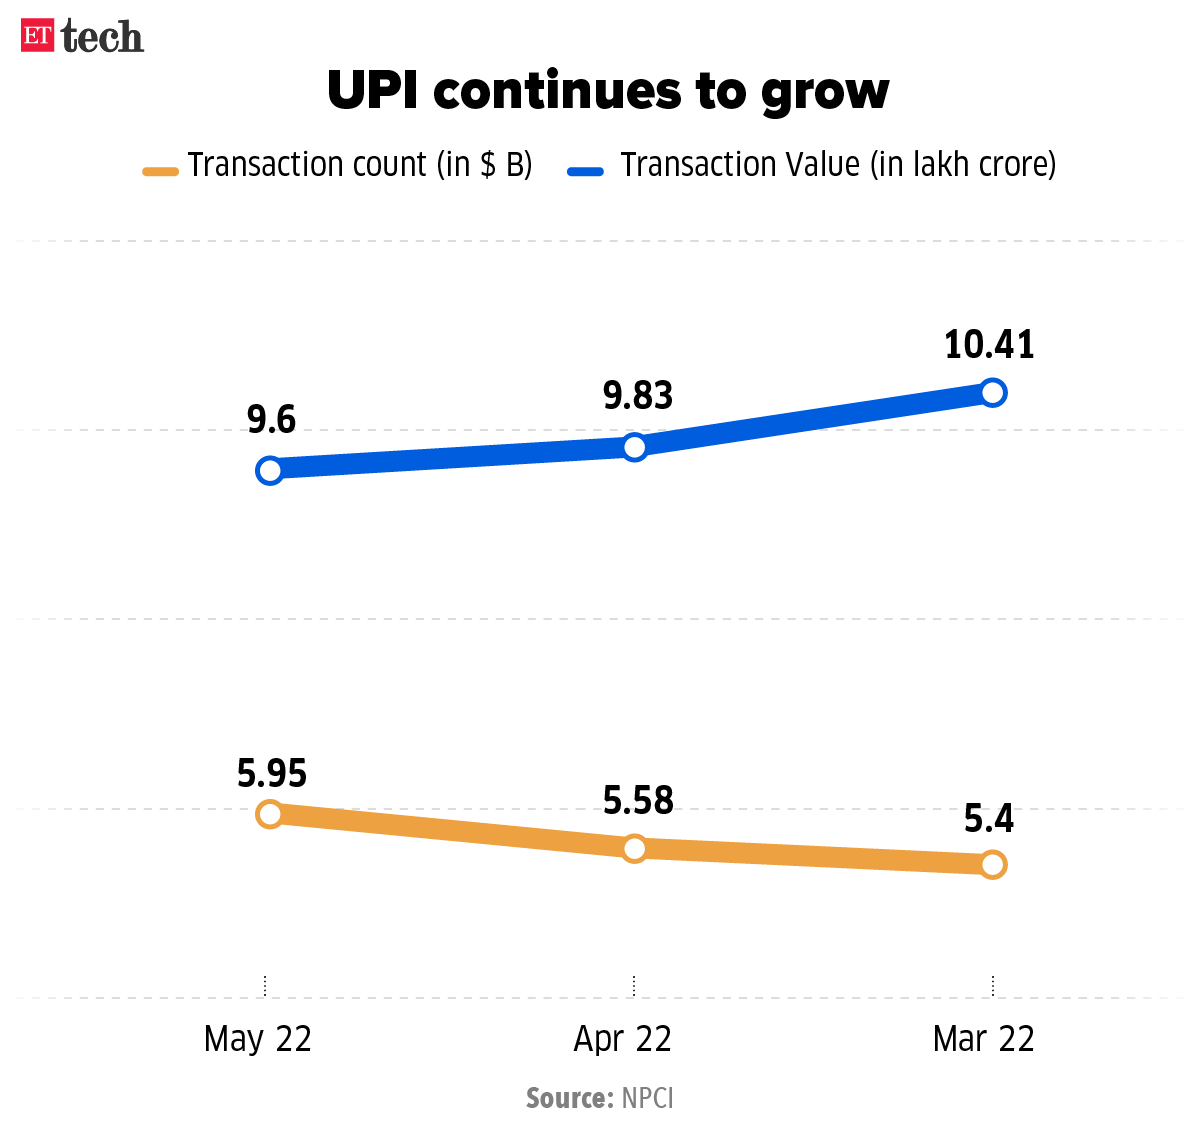 UPI continues to grow